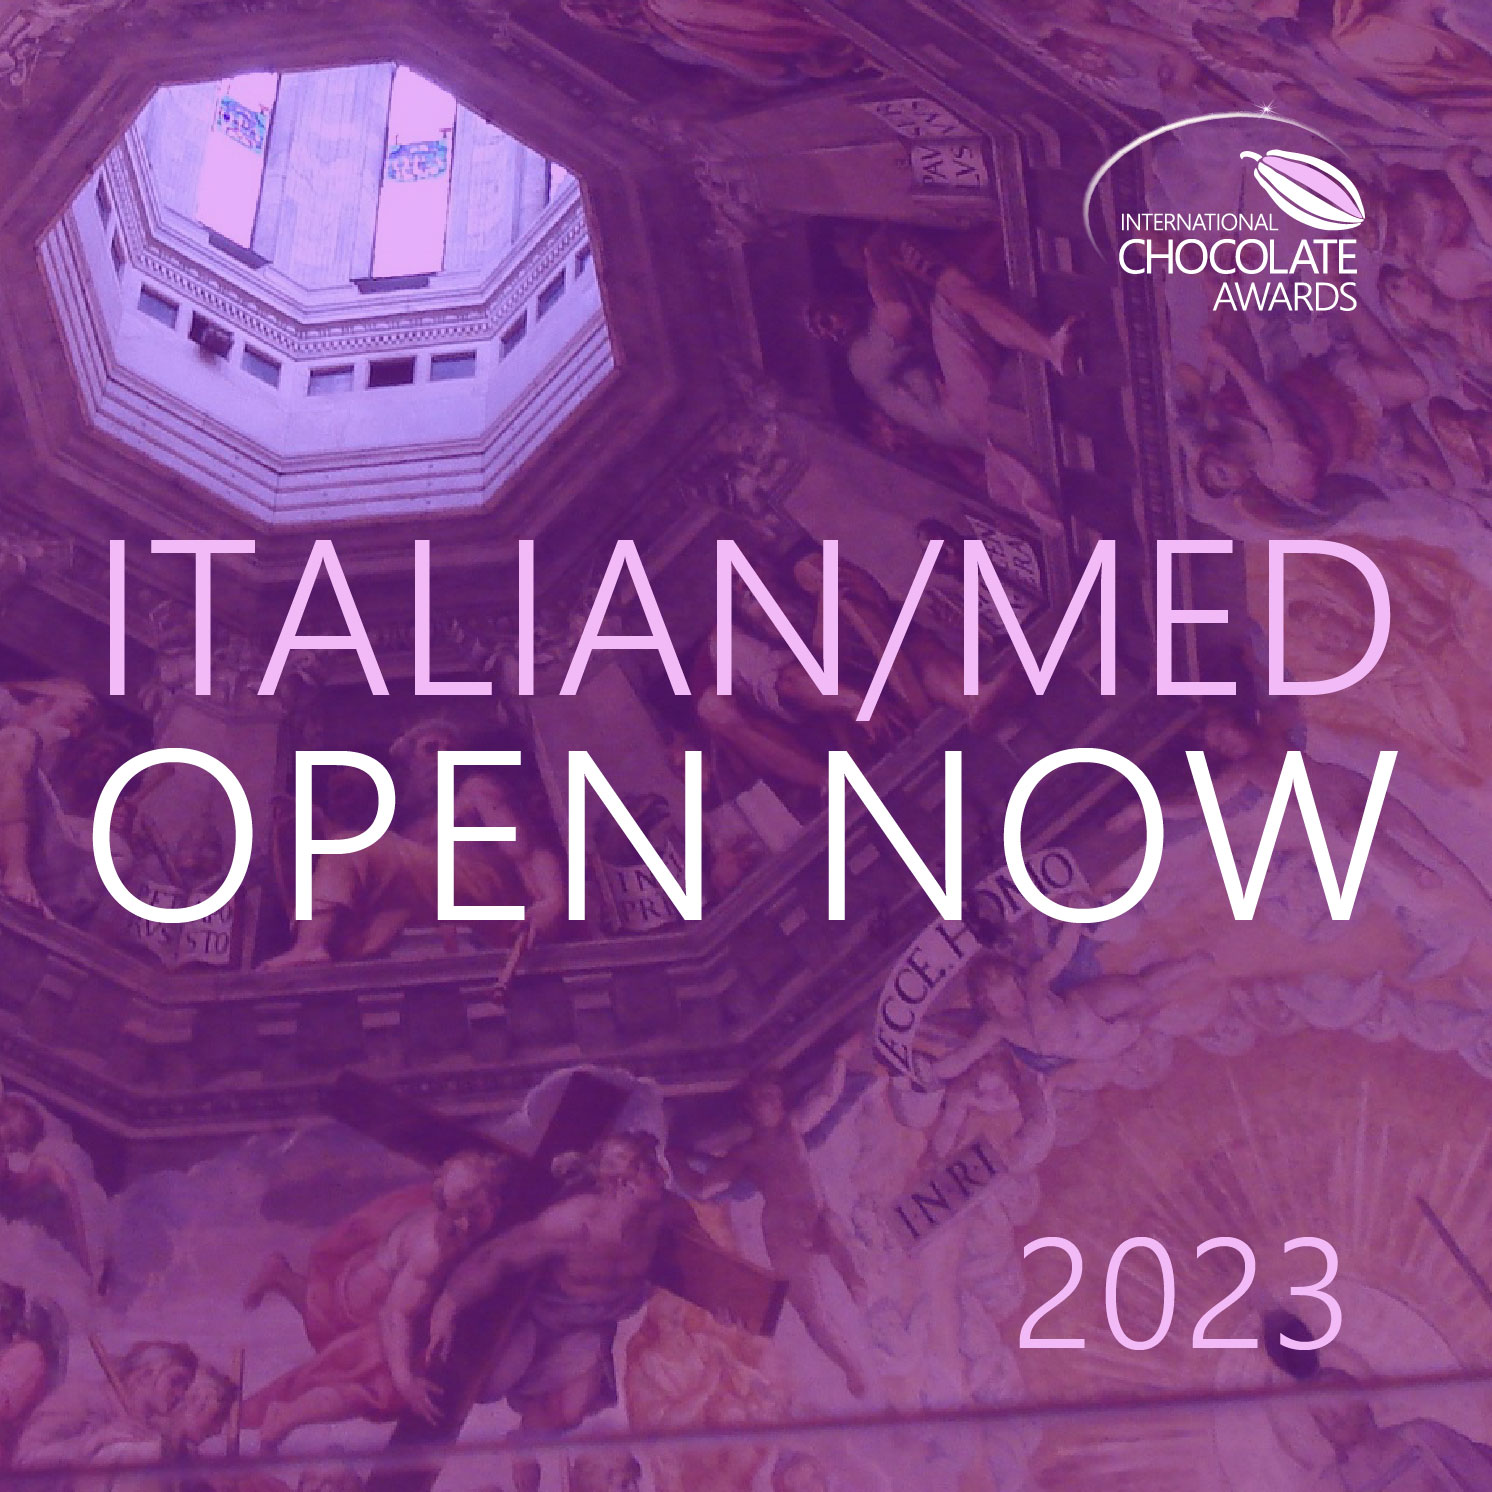 ItalianMed Competition 2023 open now square